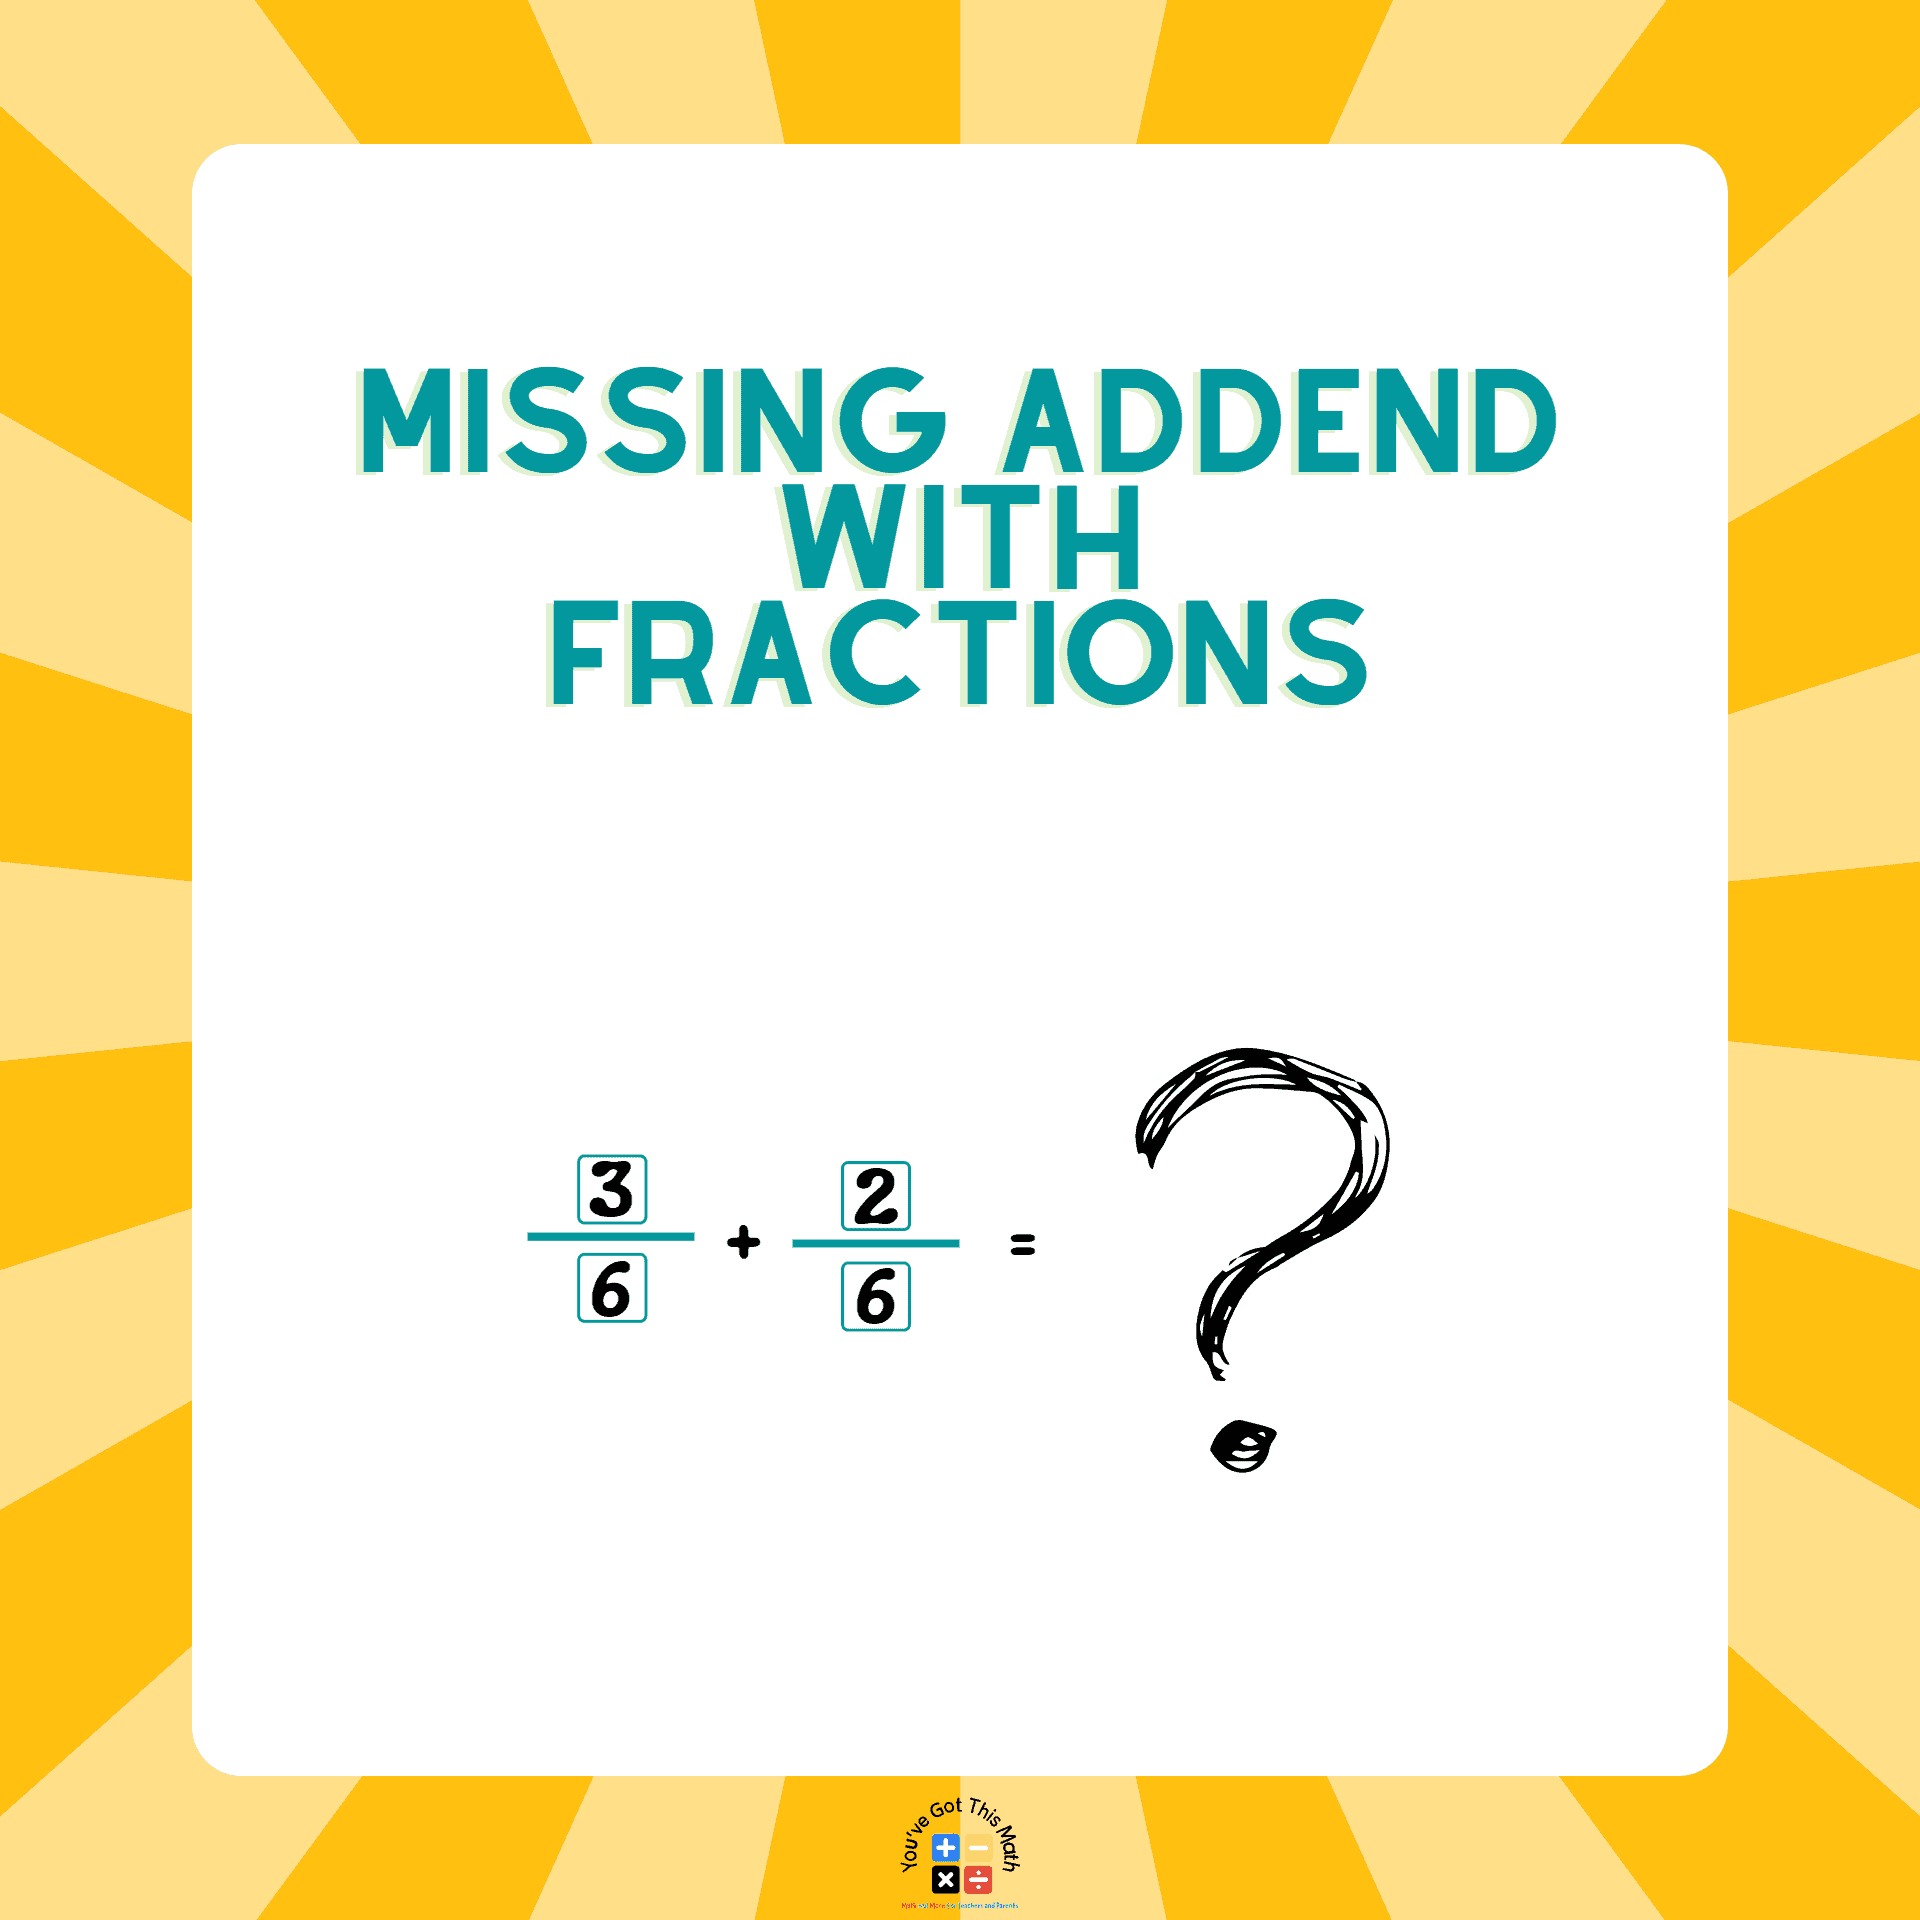 Finding the Missing Addend with Fractions